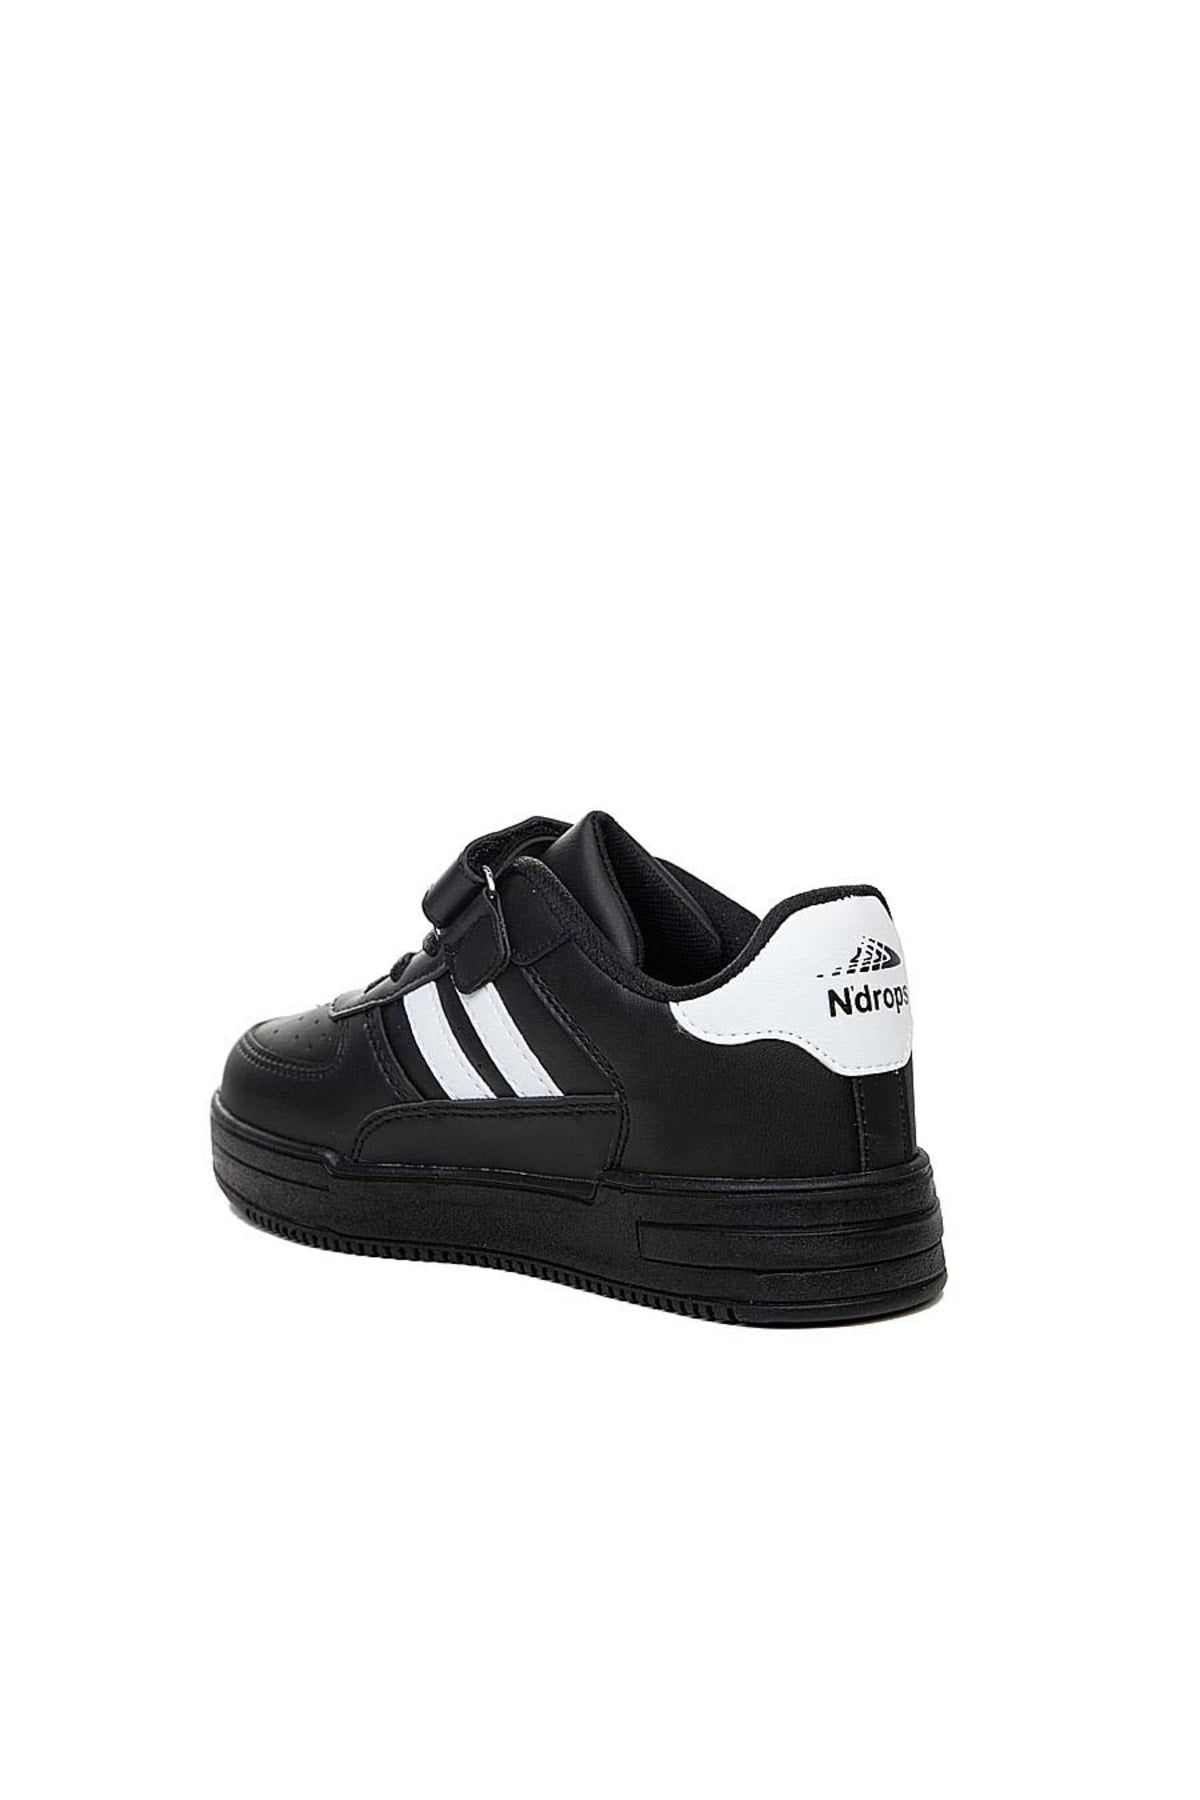 , Skin, Orthopedic, Velcro, Black and White Color Kids Sports Shoes